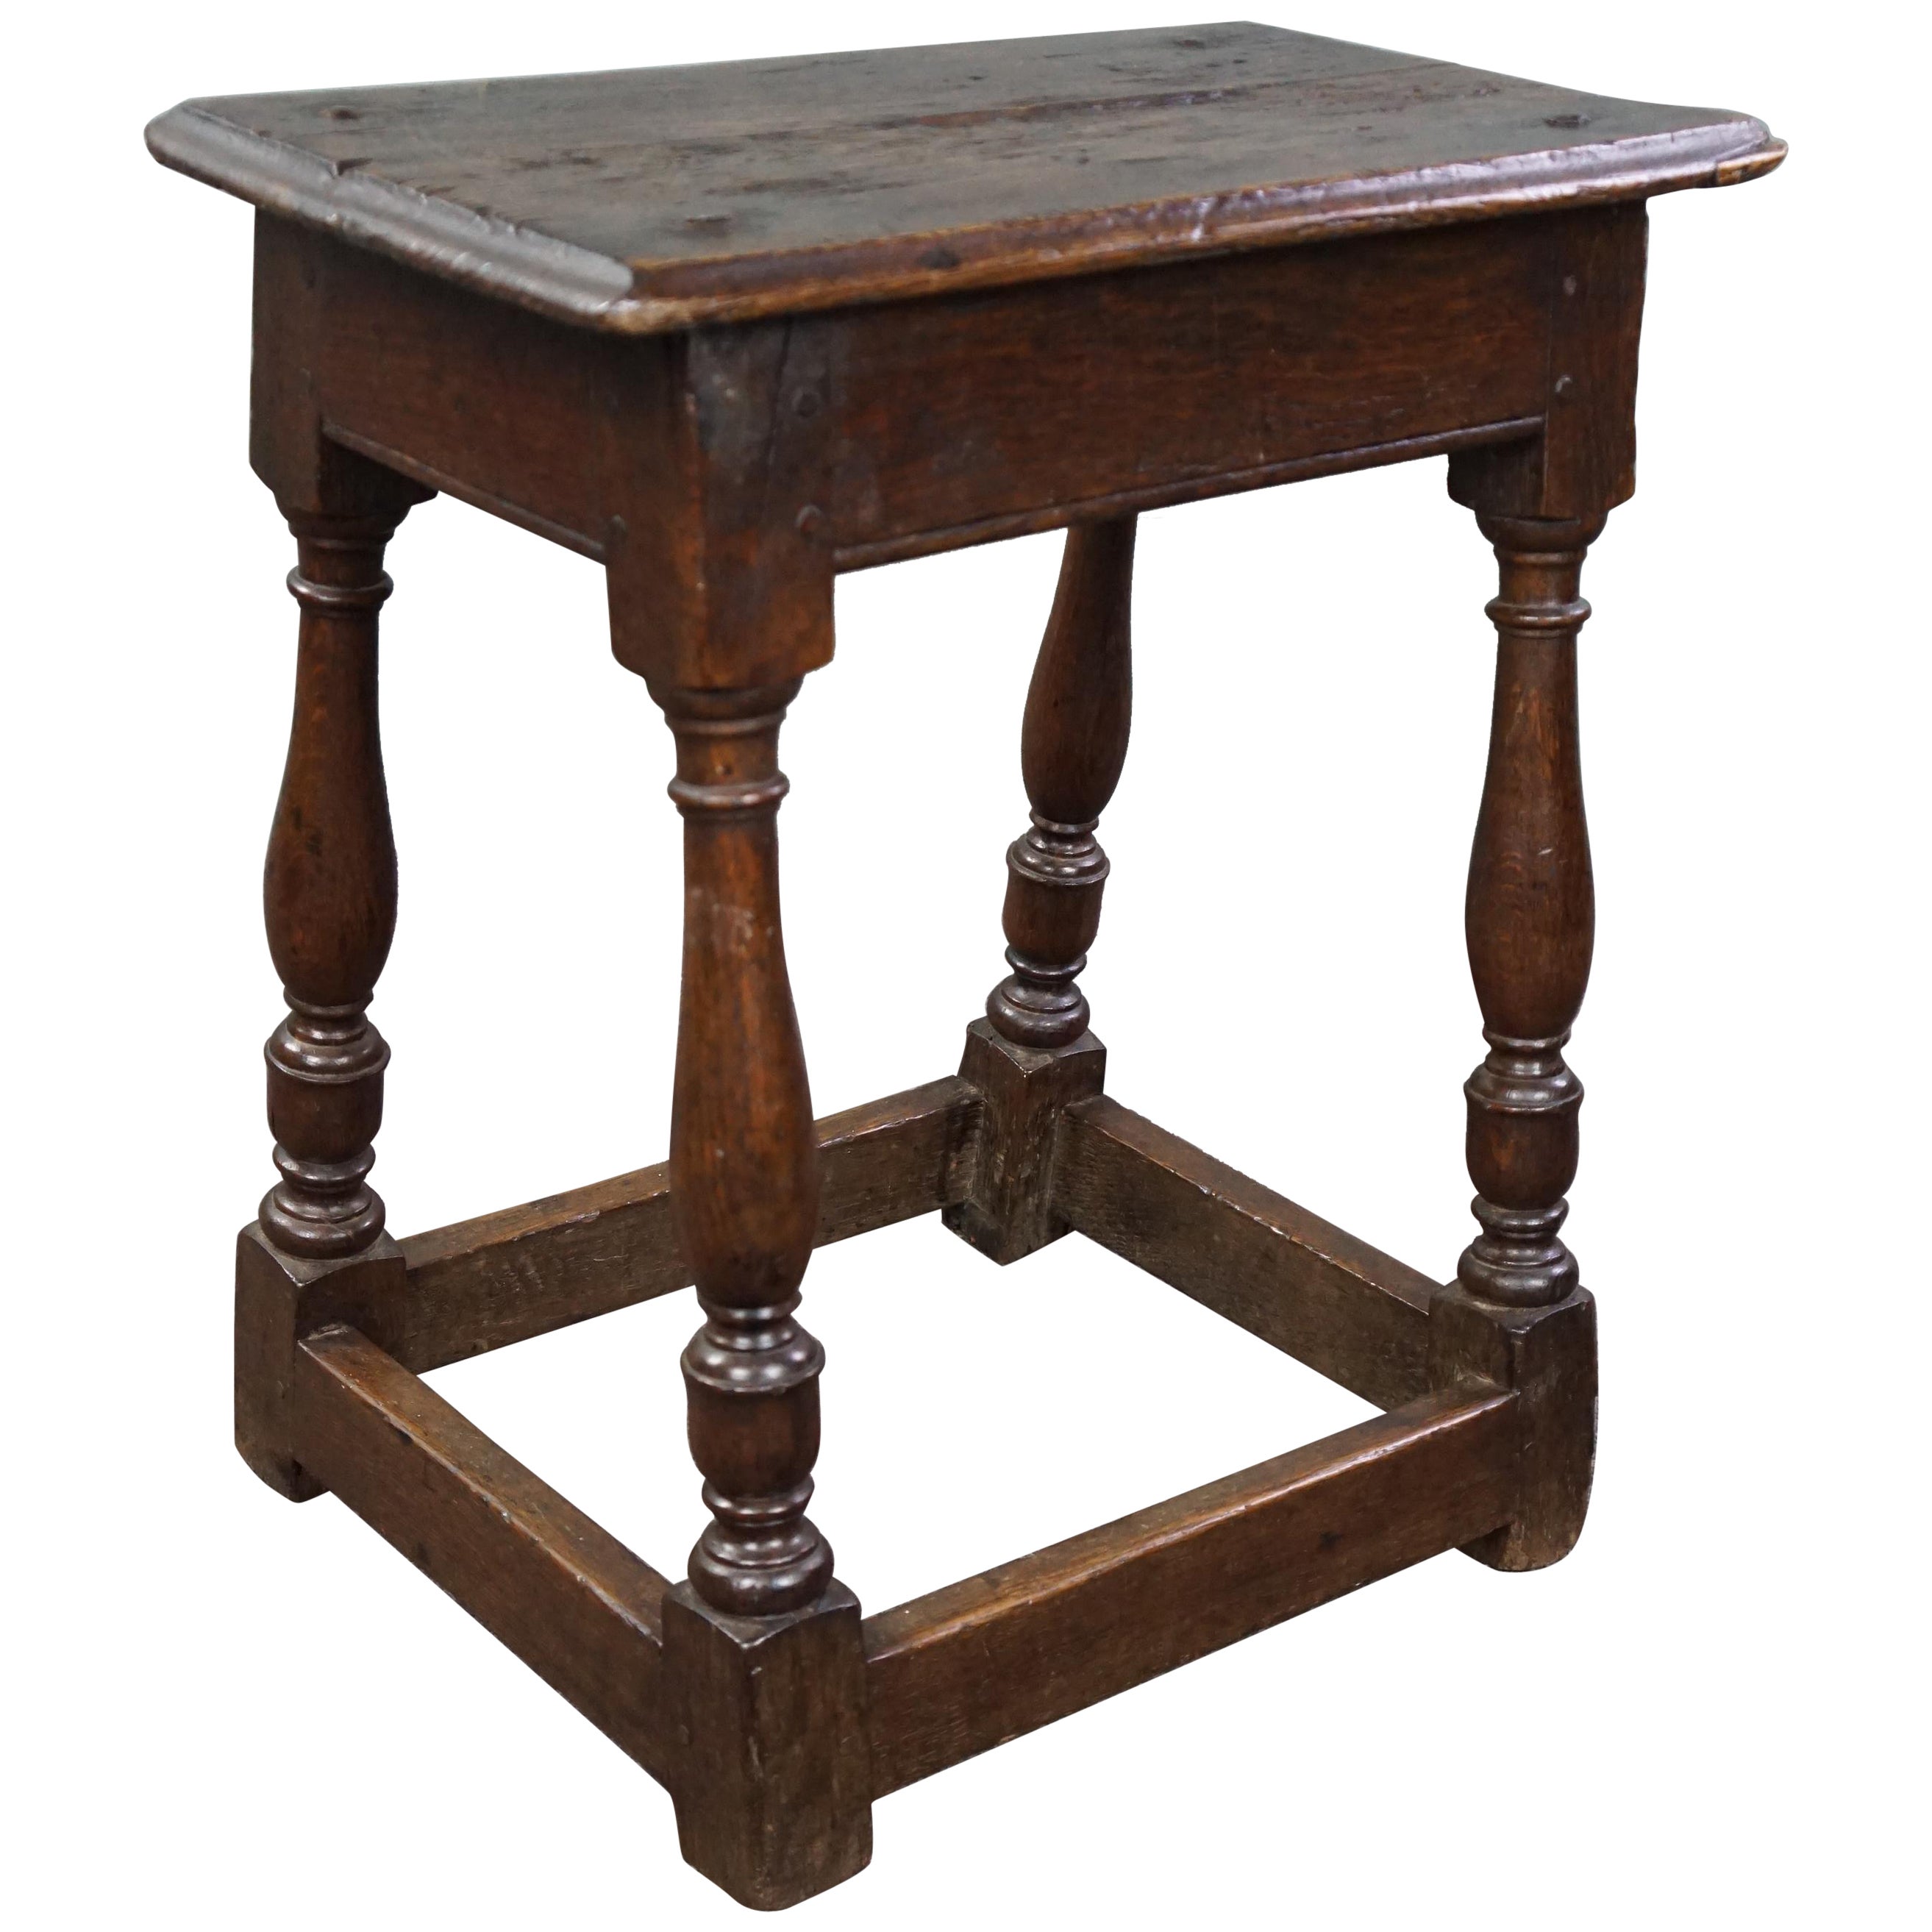 Very beautiful and original 16th-century English oak joint stool For Sale